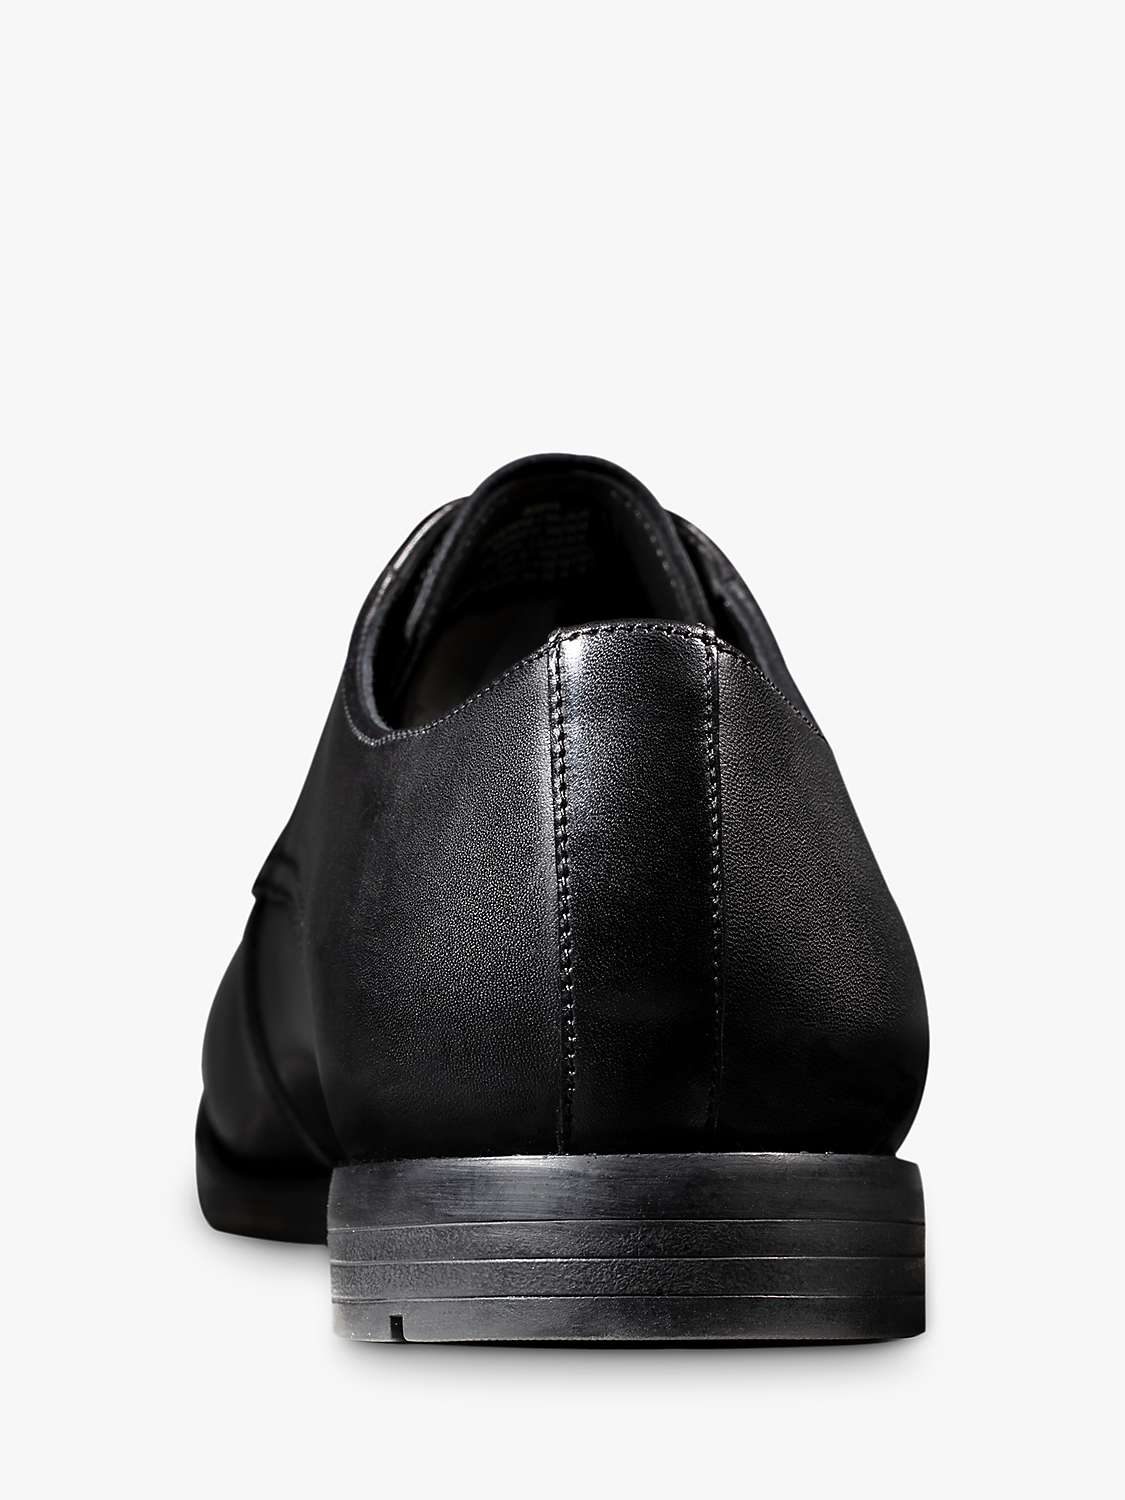 Buy Clarks Ronnie Walk Leather Derby Shoes Online at johnlewis.com